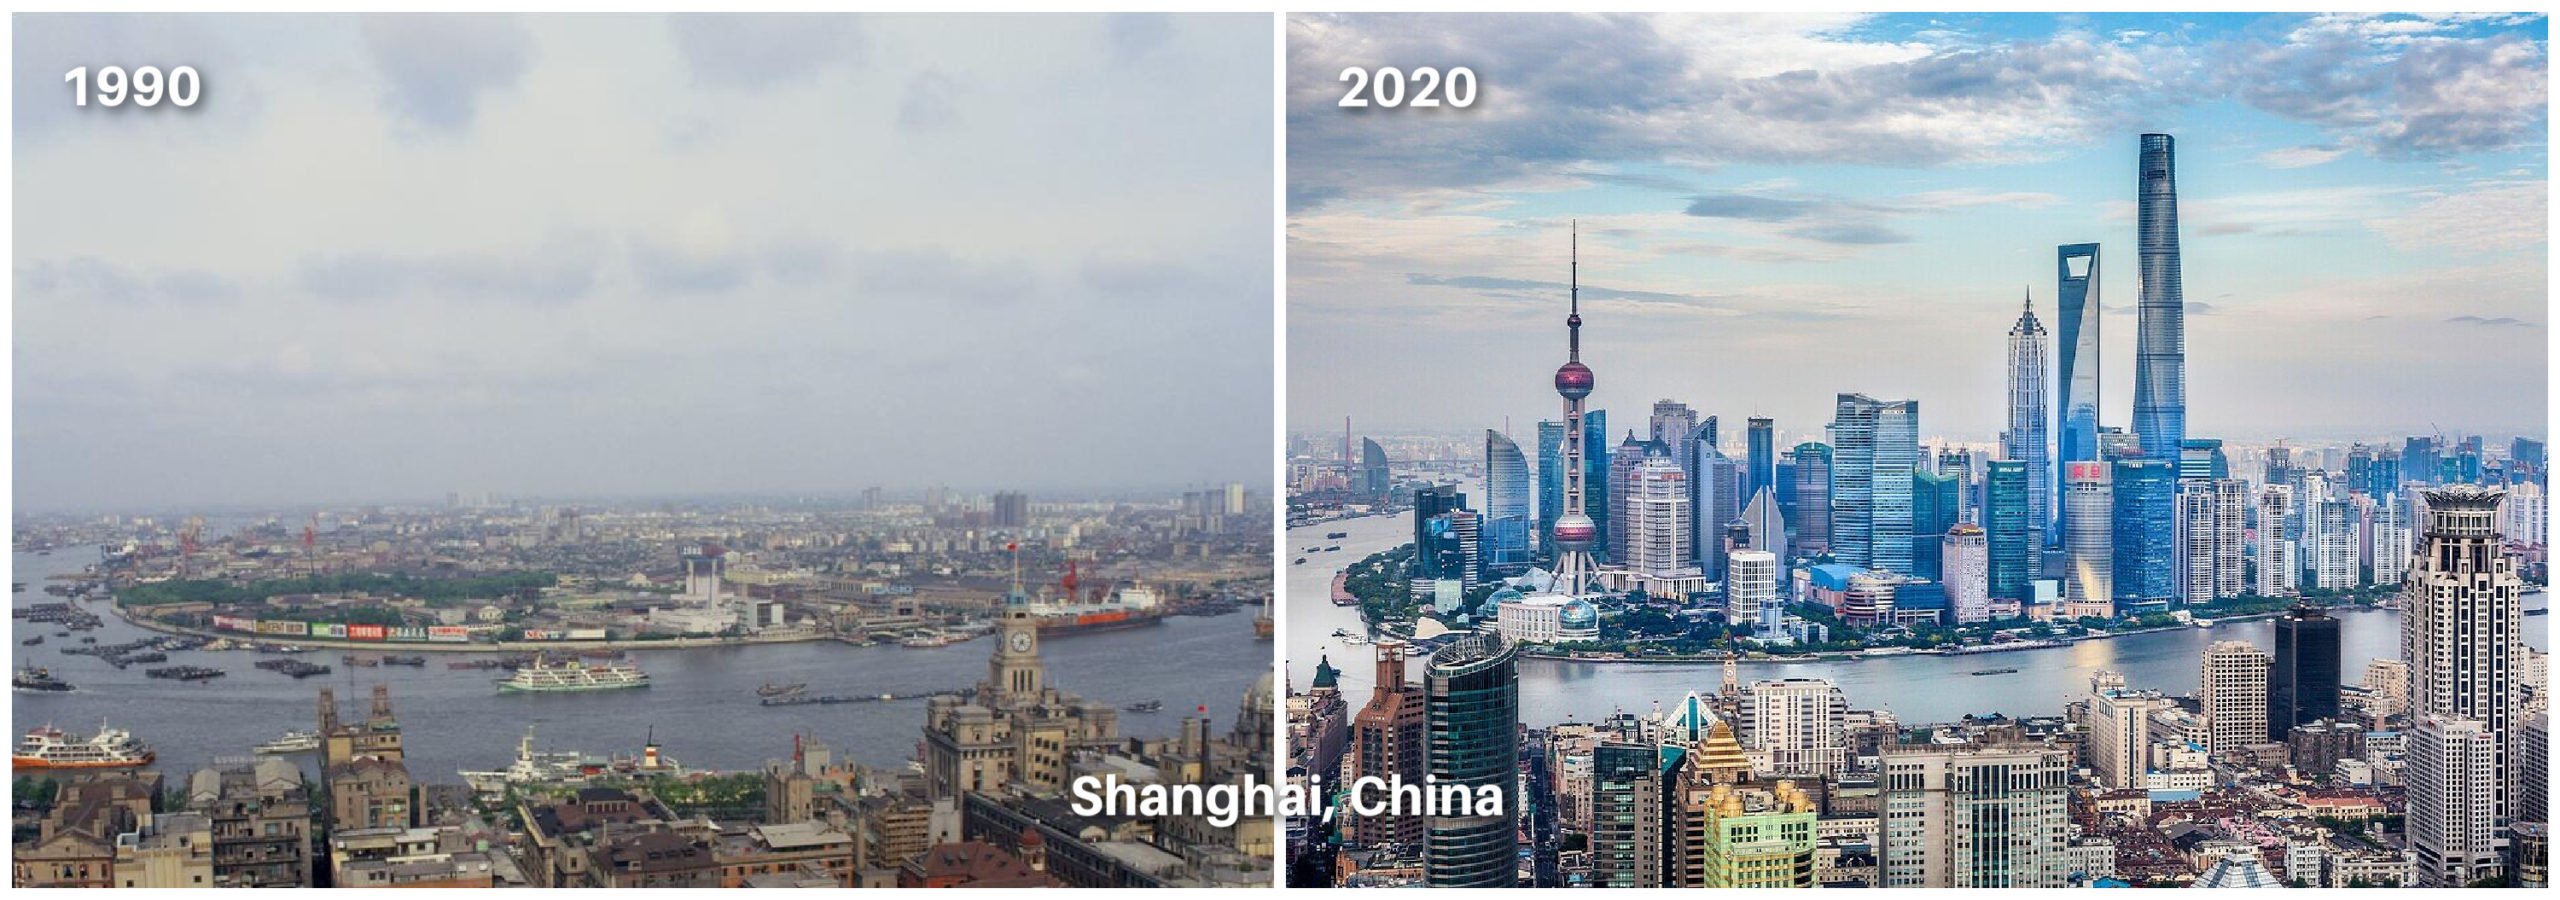 Shanghai in 1990 and 2020.